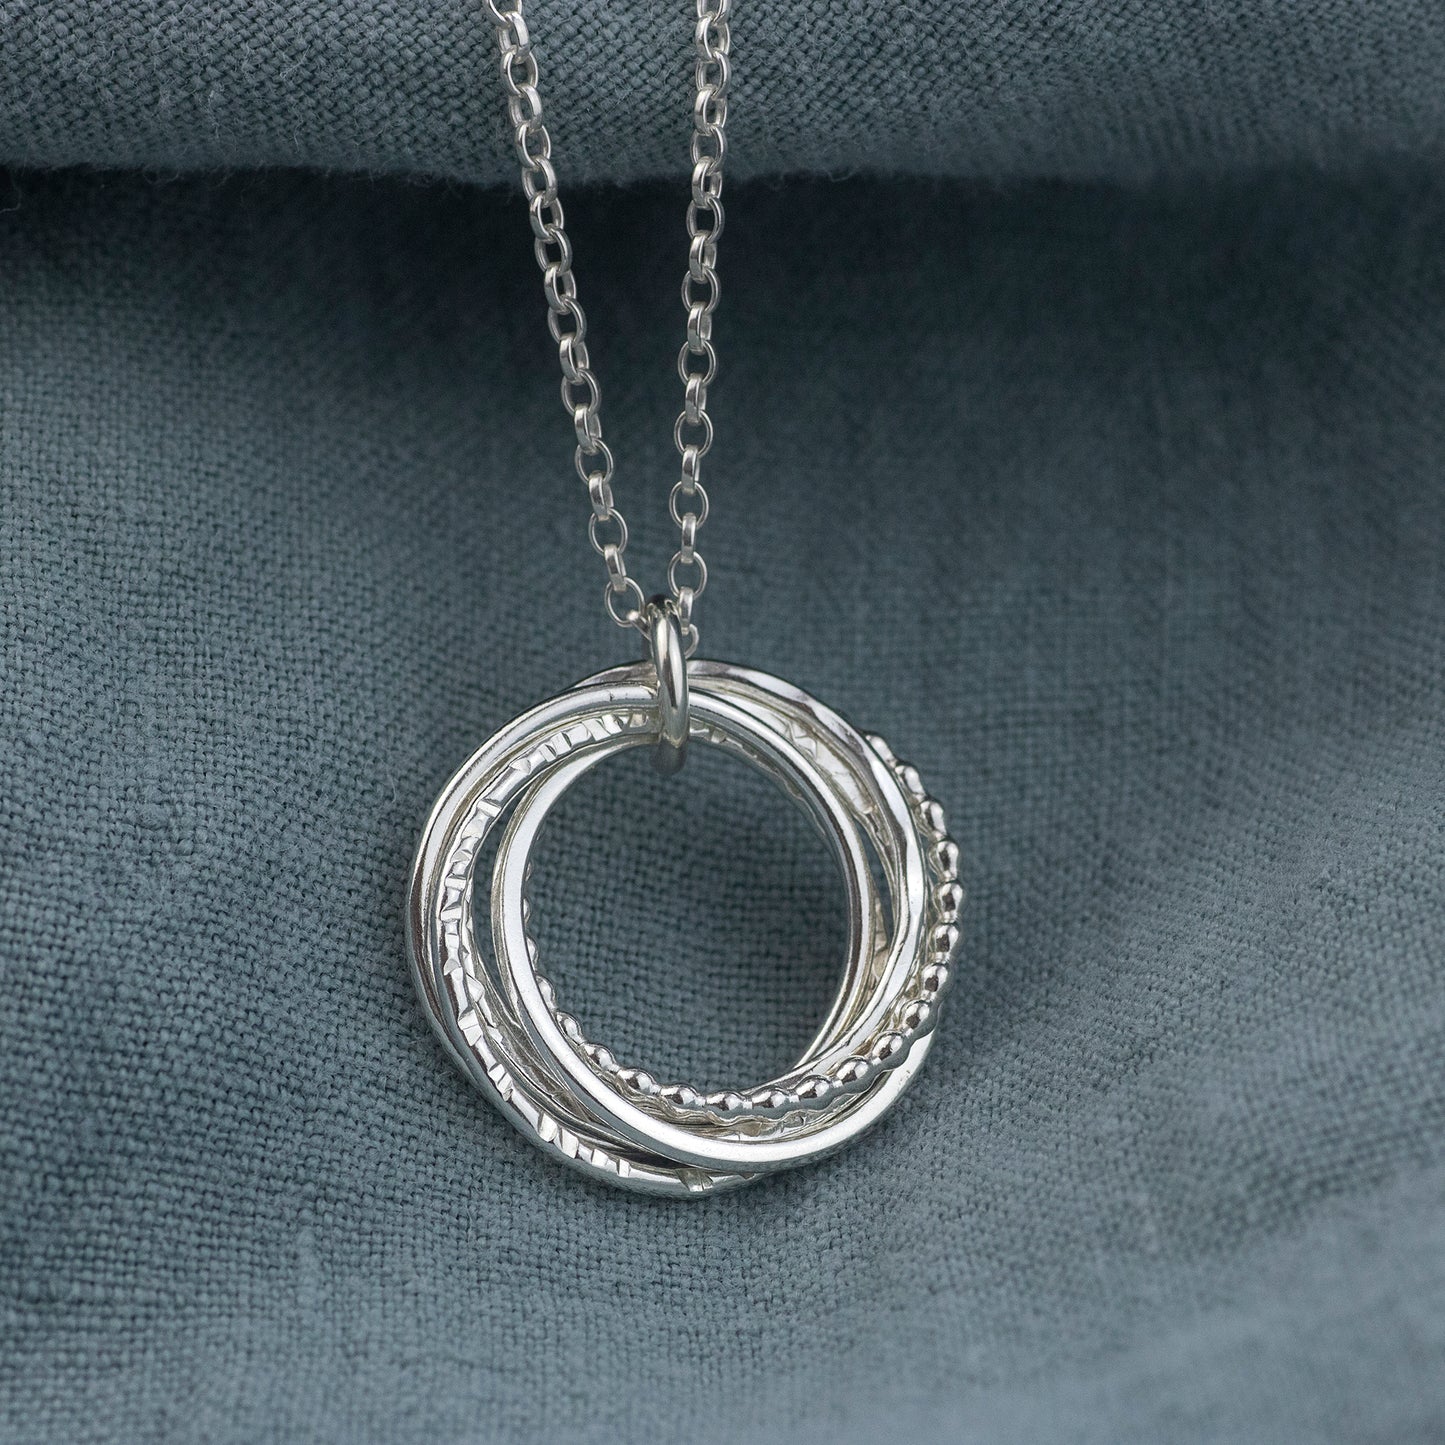 60th Birthday Necklace - Silver - The Original 6 Links for 6 Decades Necklace